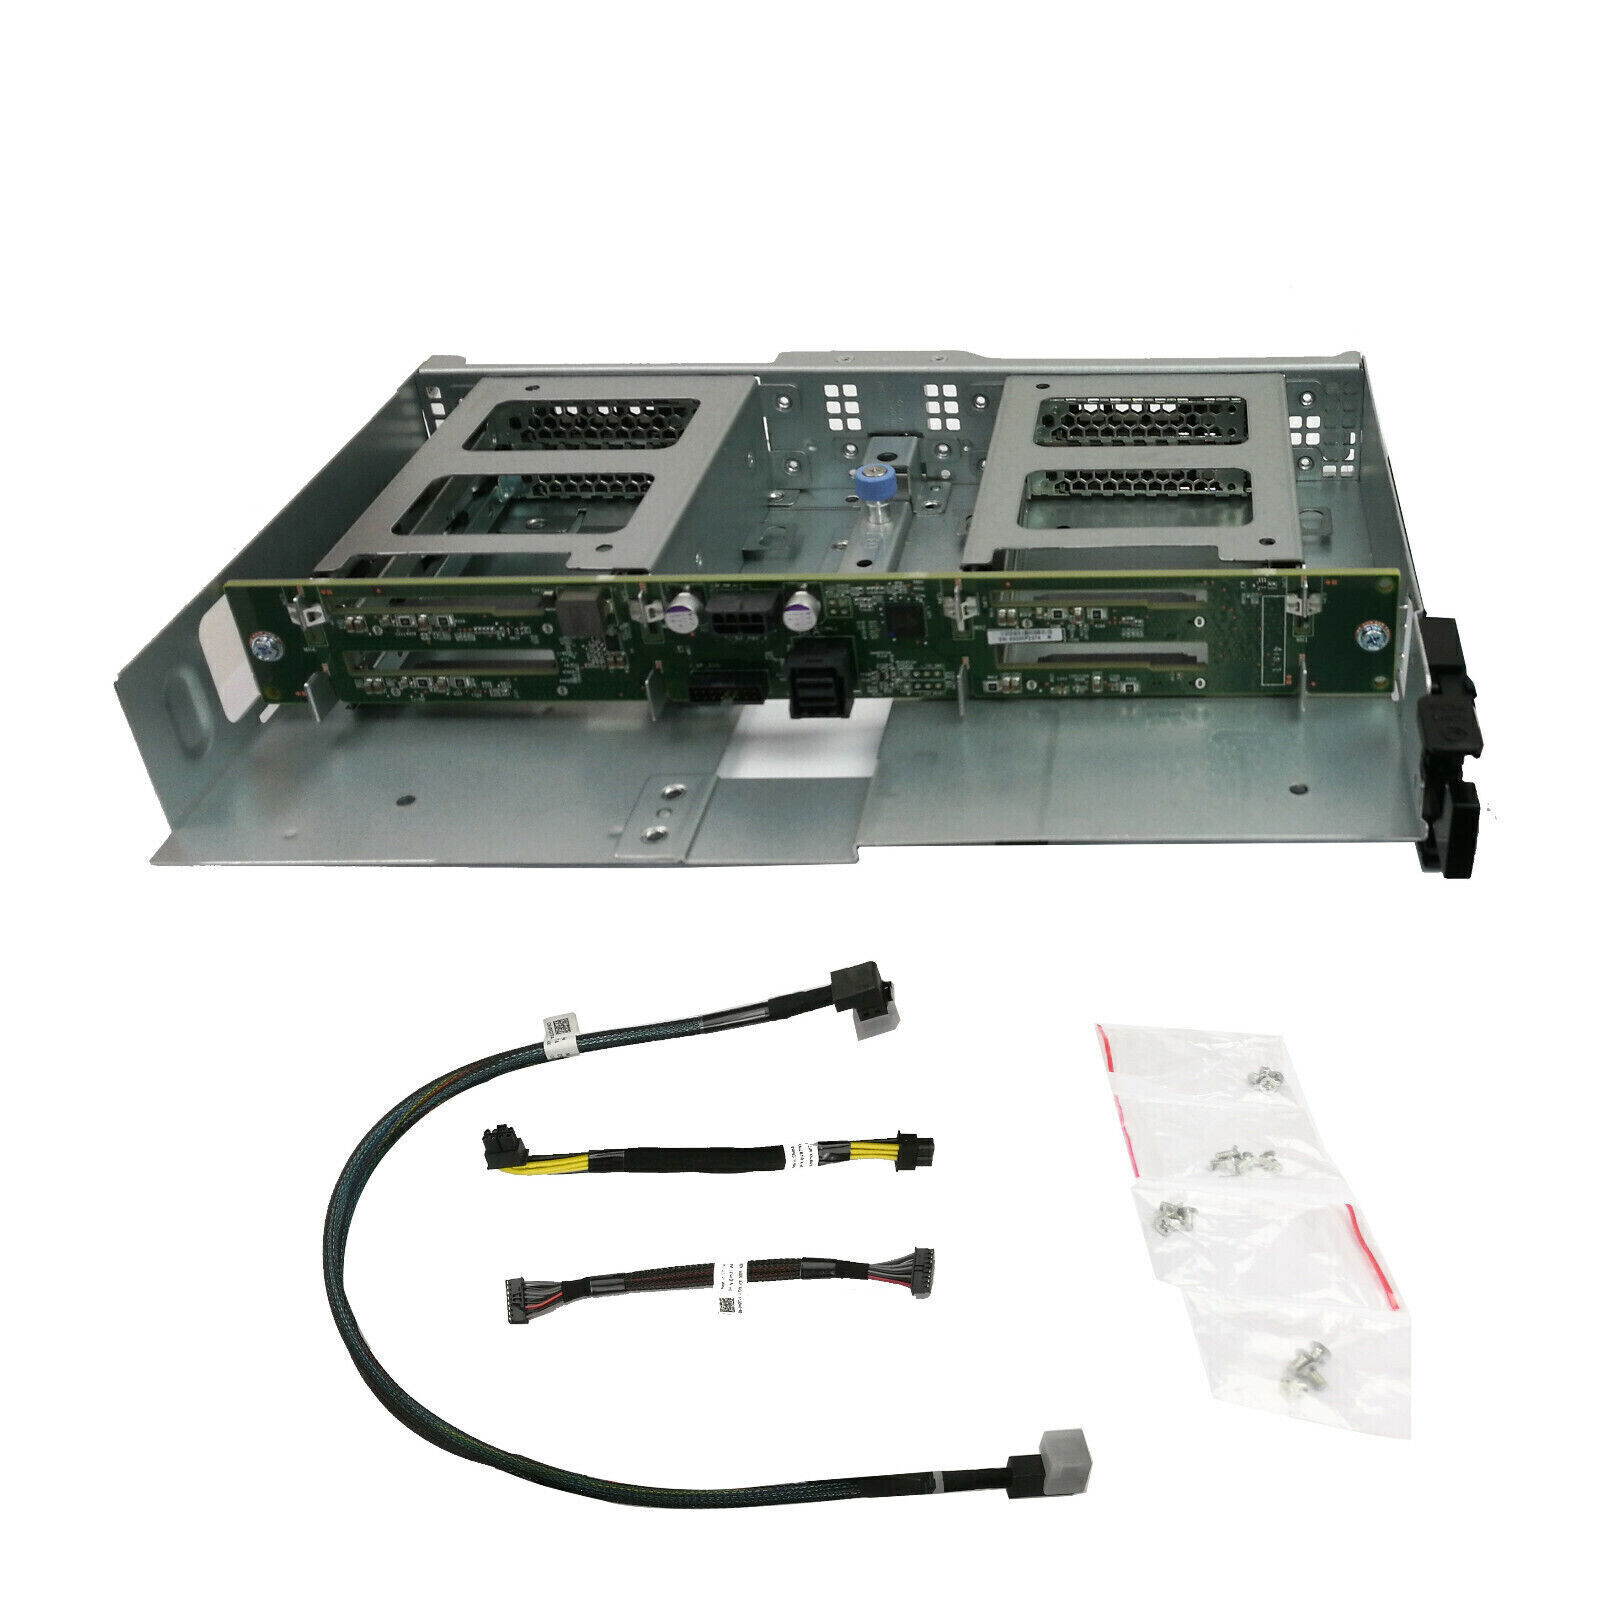 Dell R740XD 4*2.5inch Rear HDD Cage Back Panel Kit WMJR0 w/Caddy Cables US